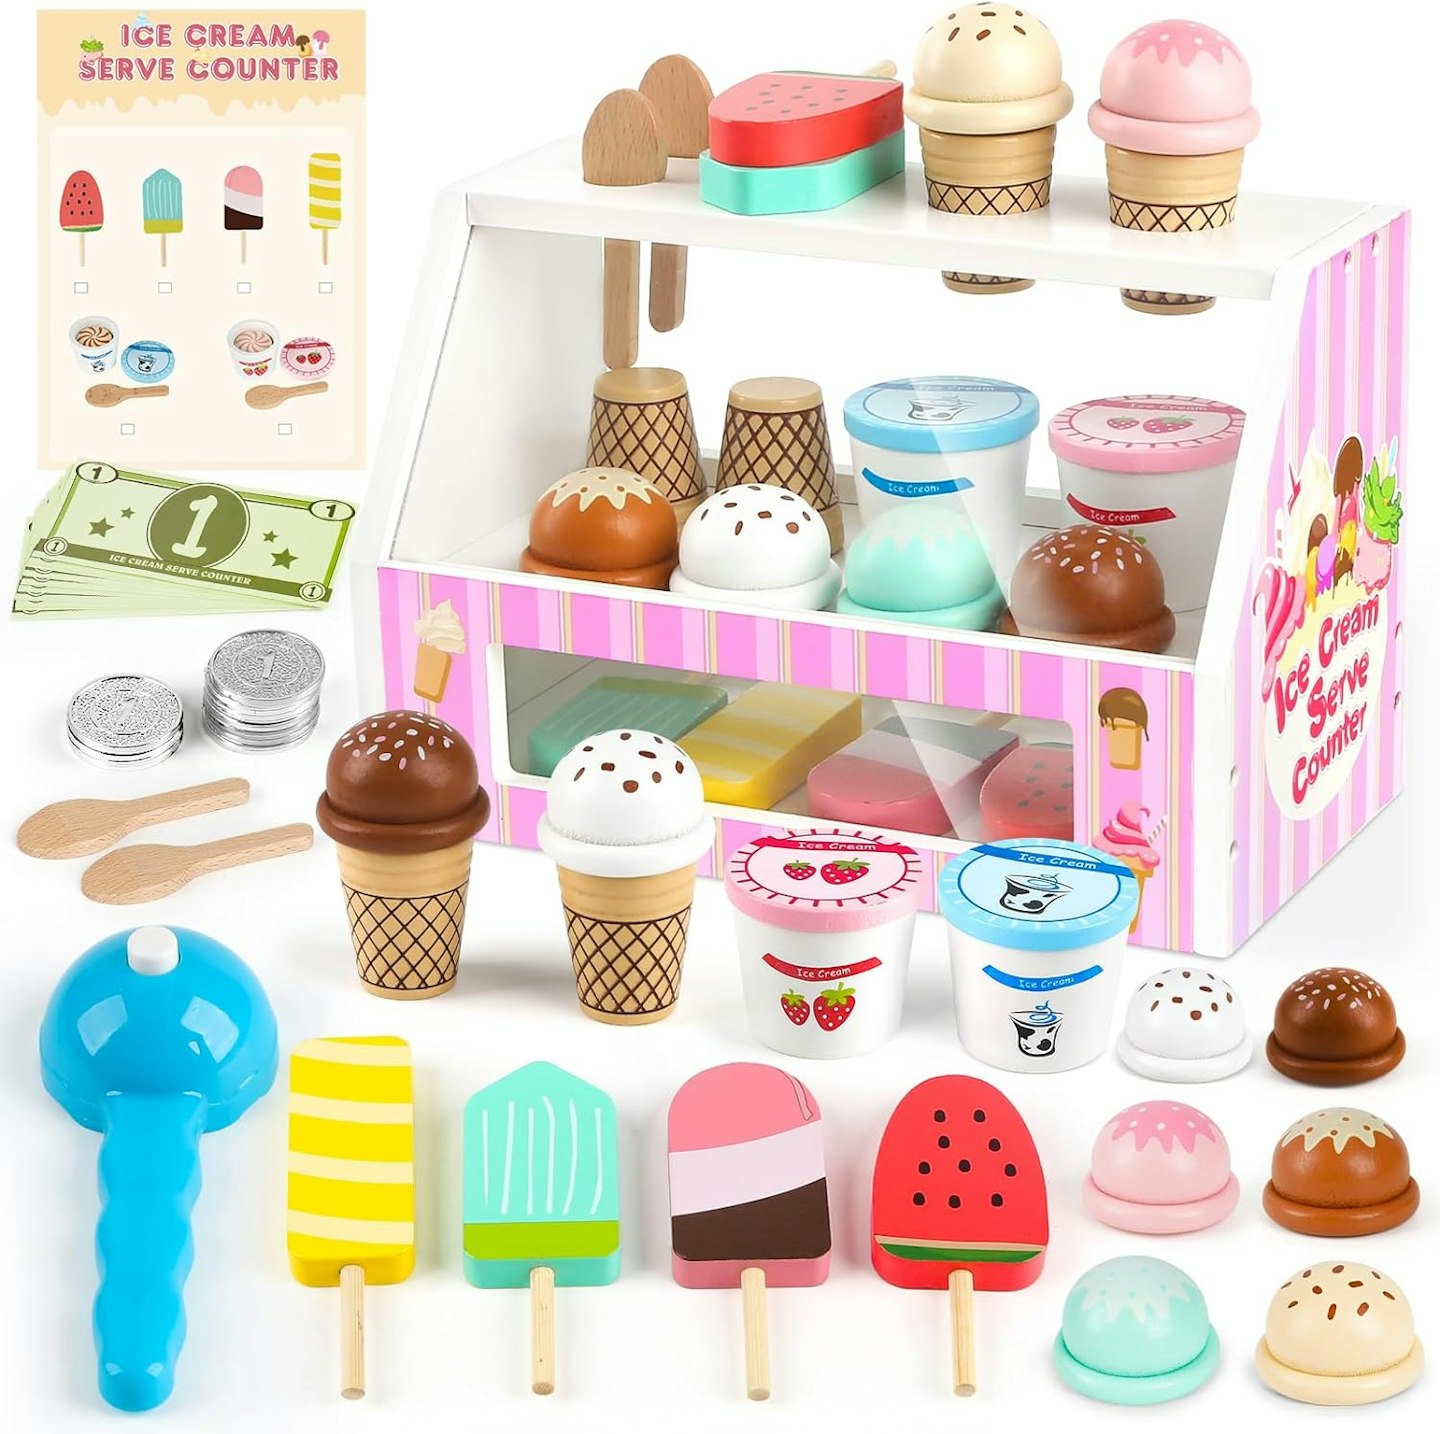 Wooden ice cream toy shop with accessories to make toy ice creams and lollies